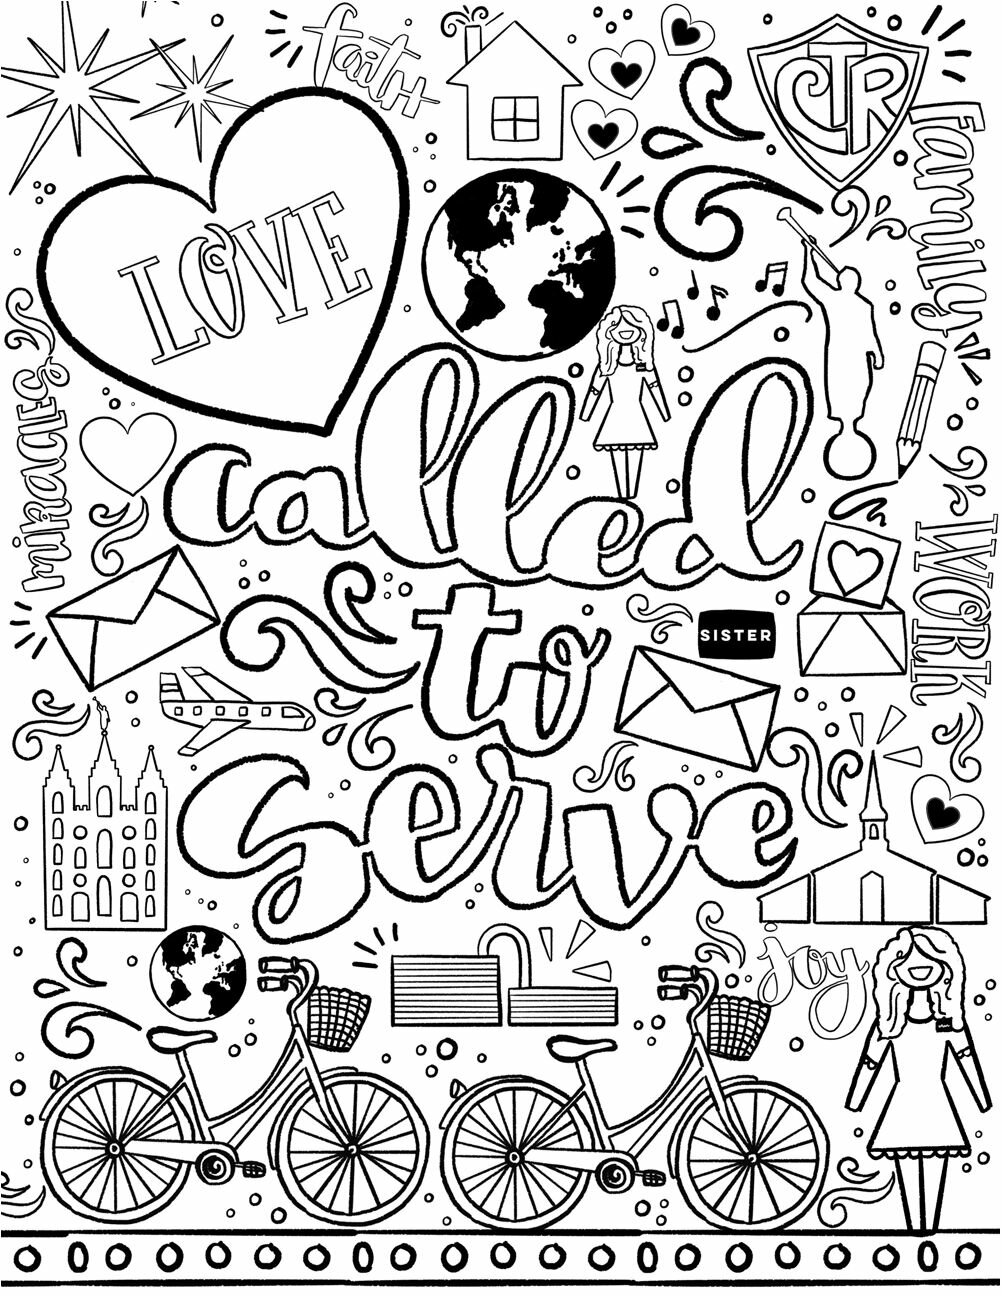 best celebrate your missionary heritage activities missionary coloring pages free 